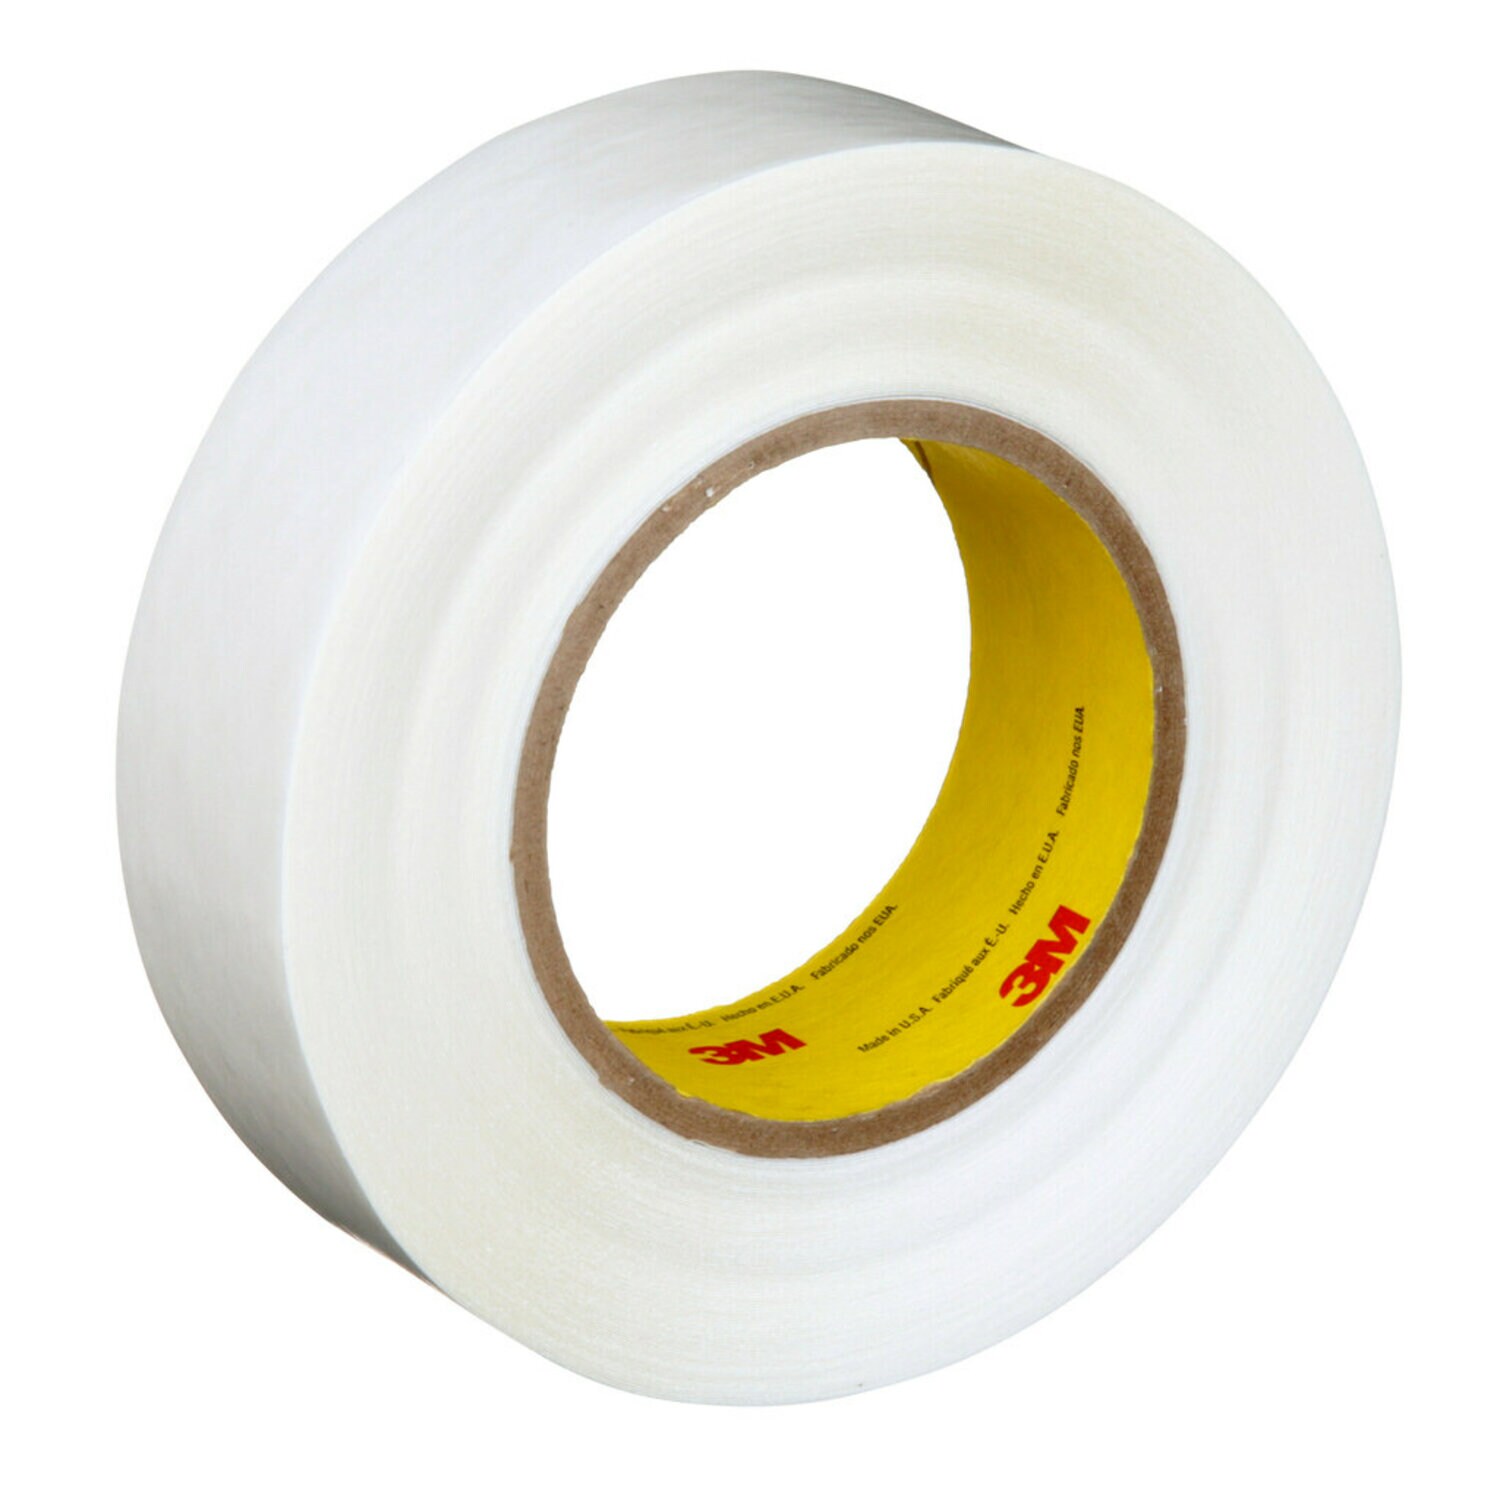 7000123505 - 3M Double Coated Tape 9579, White, 1 1/2 in x 36 yd, 9 mil, 24 rolls
per case